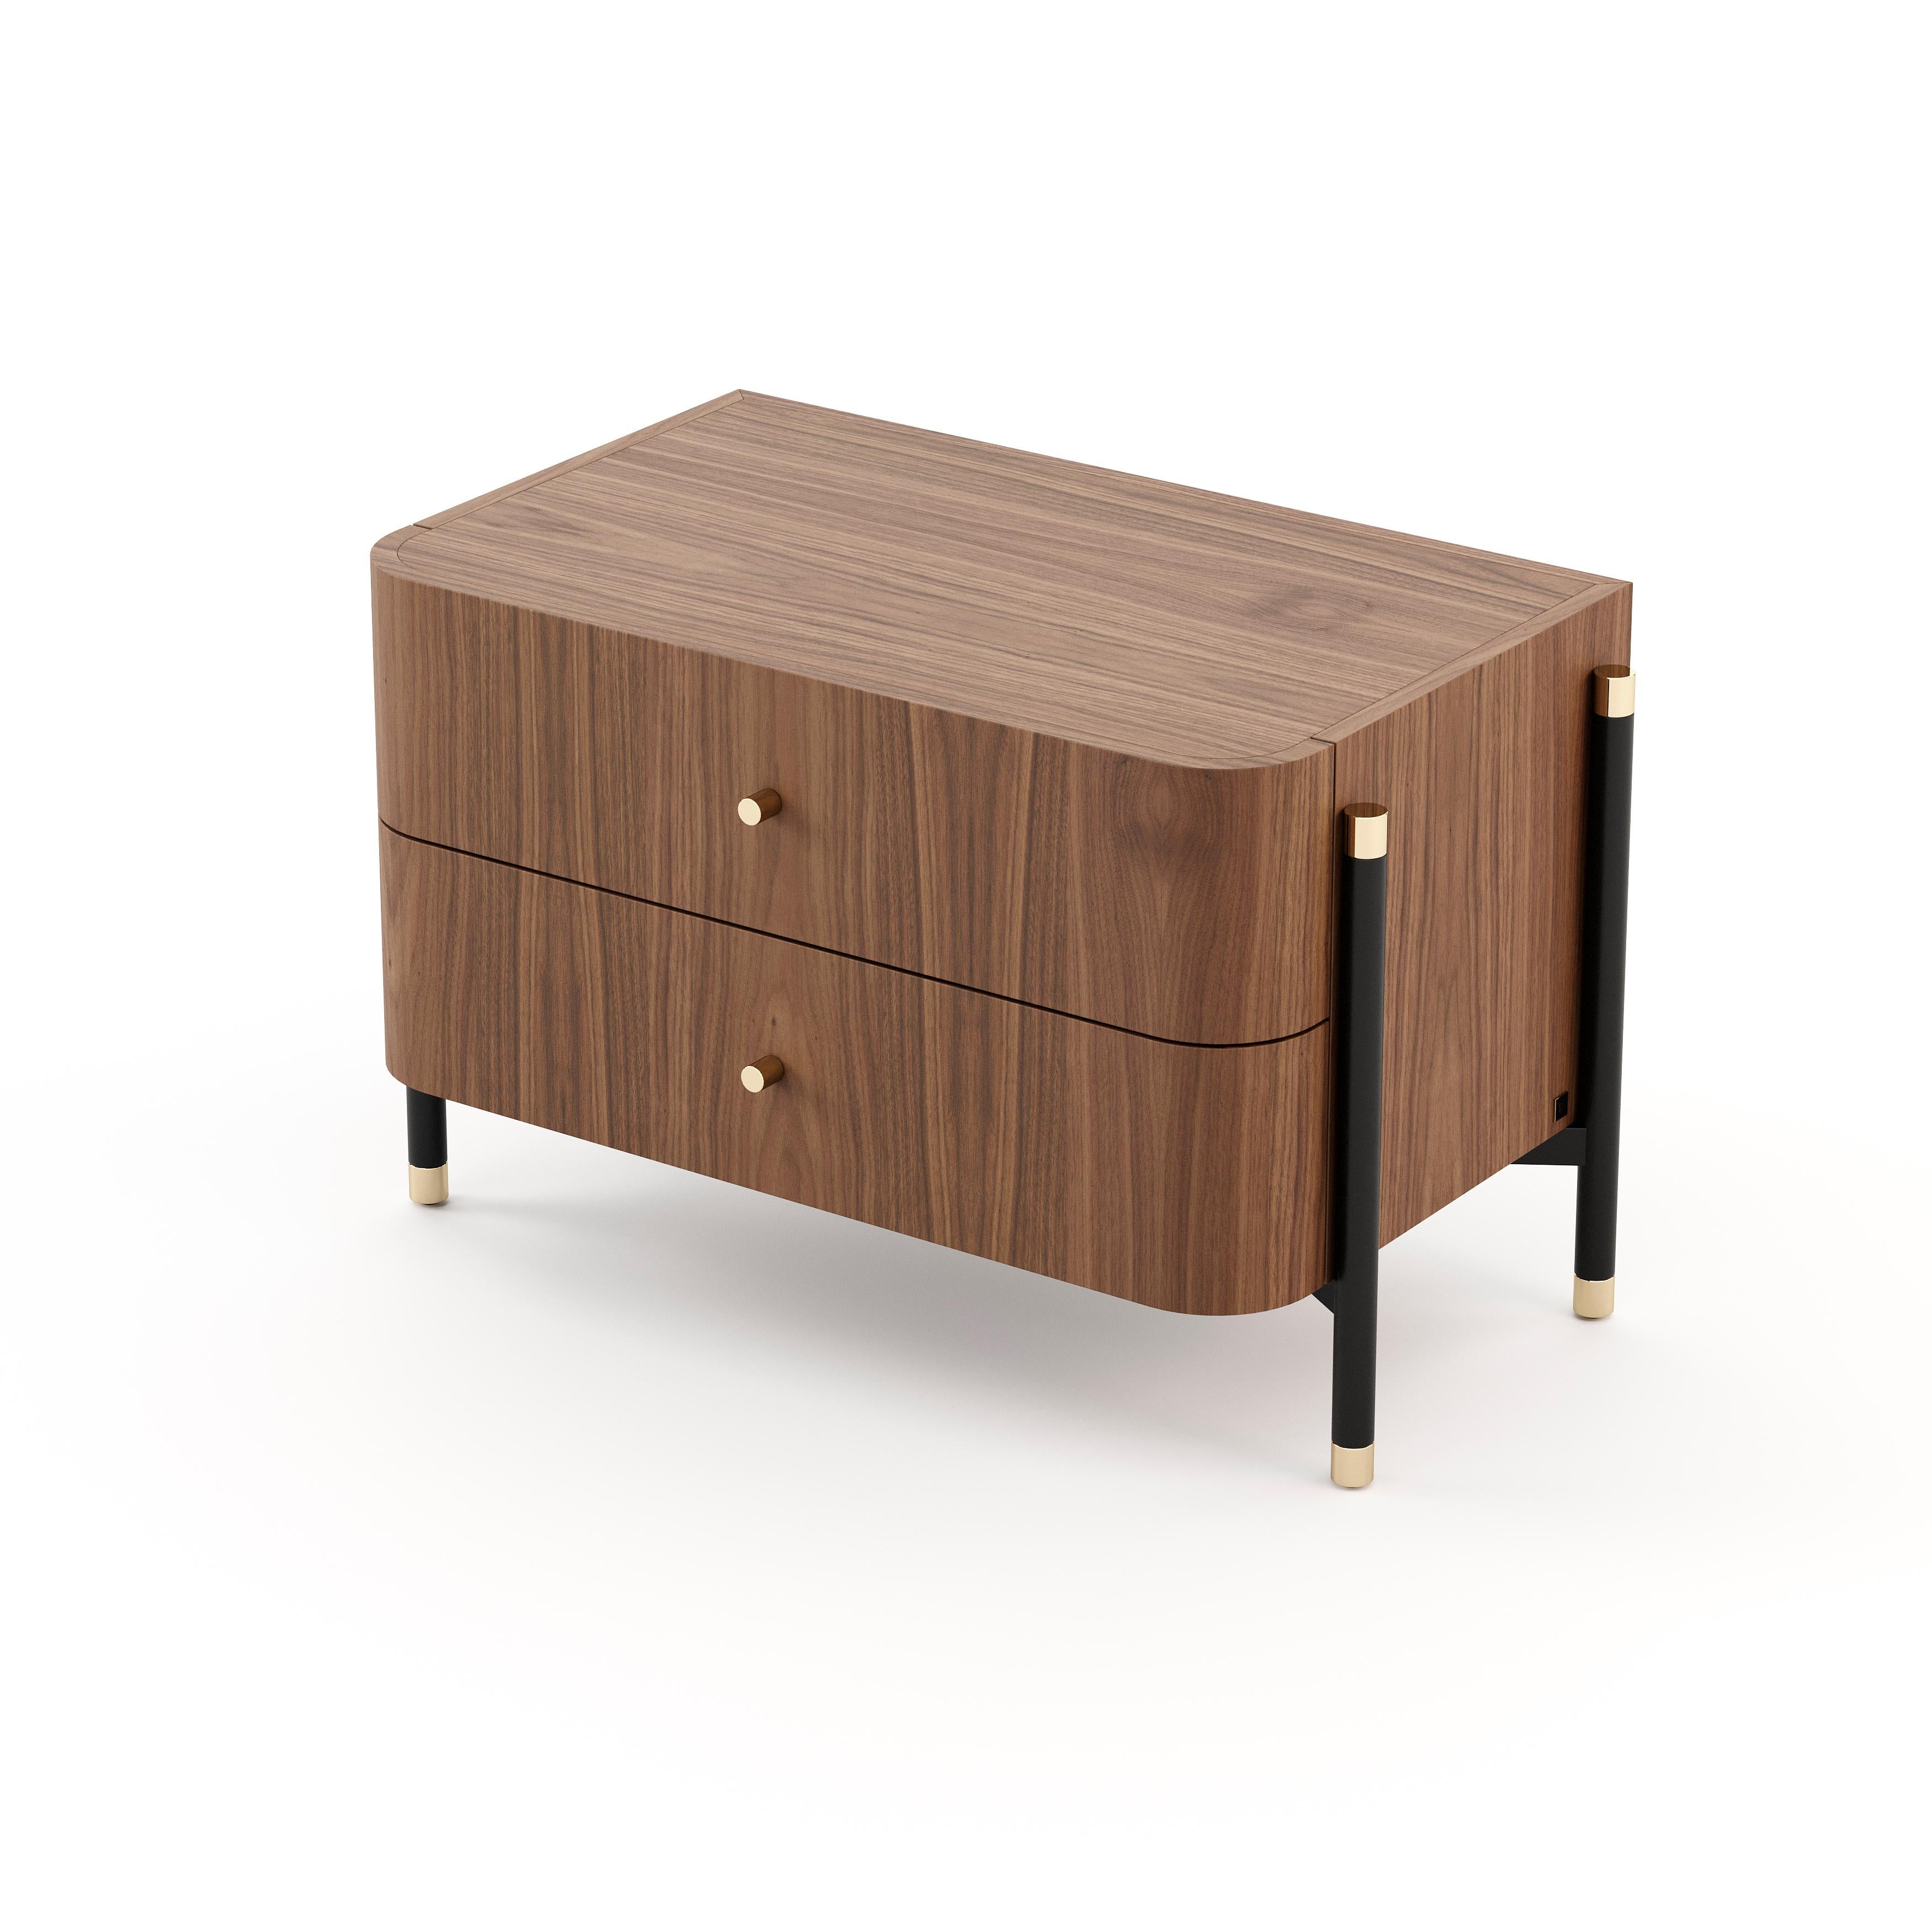 Portuguese 21st-century Contemporary bedside table, finished in customisable wood veneer For Sale